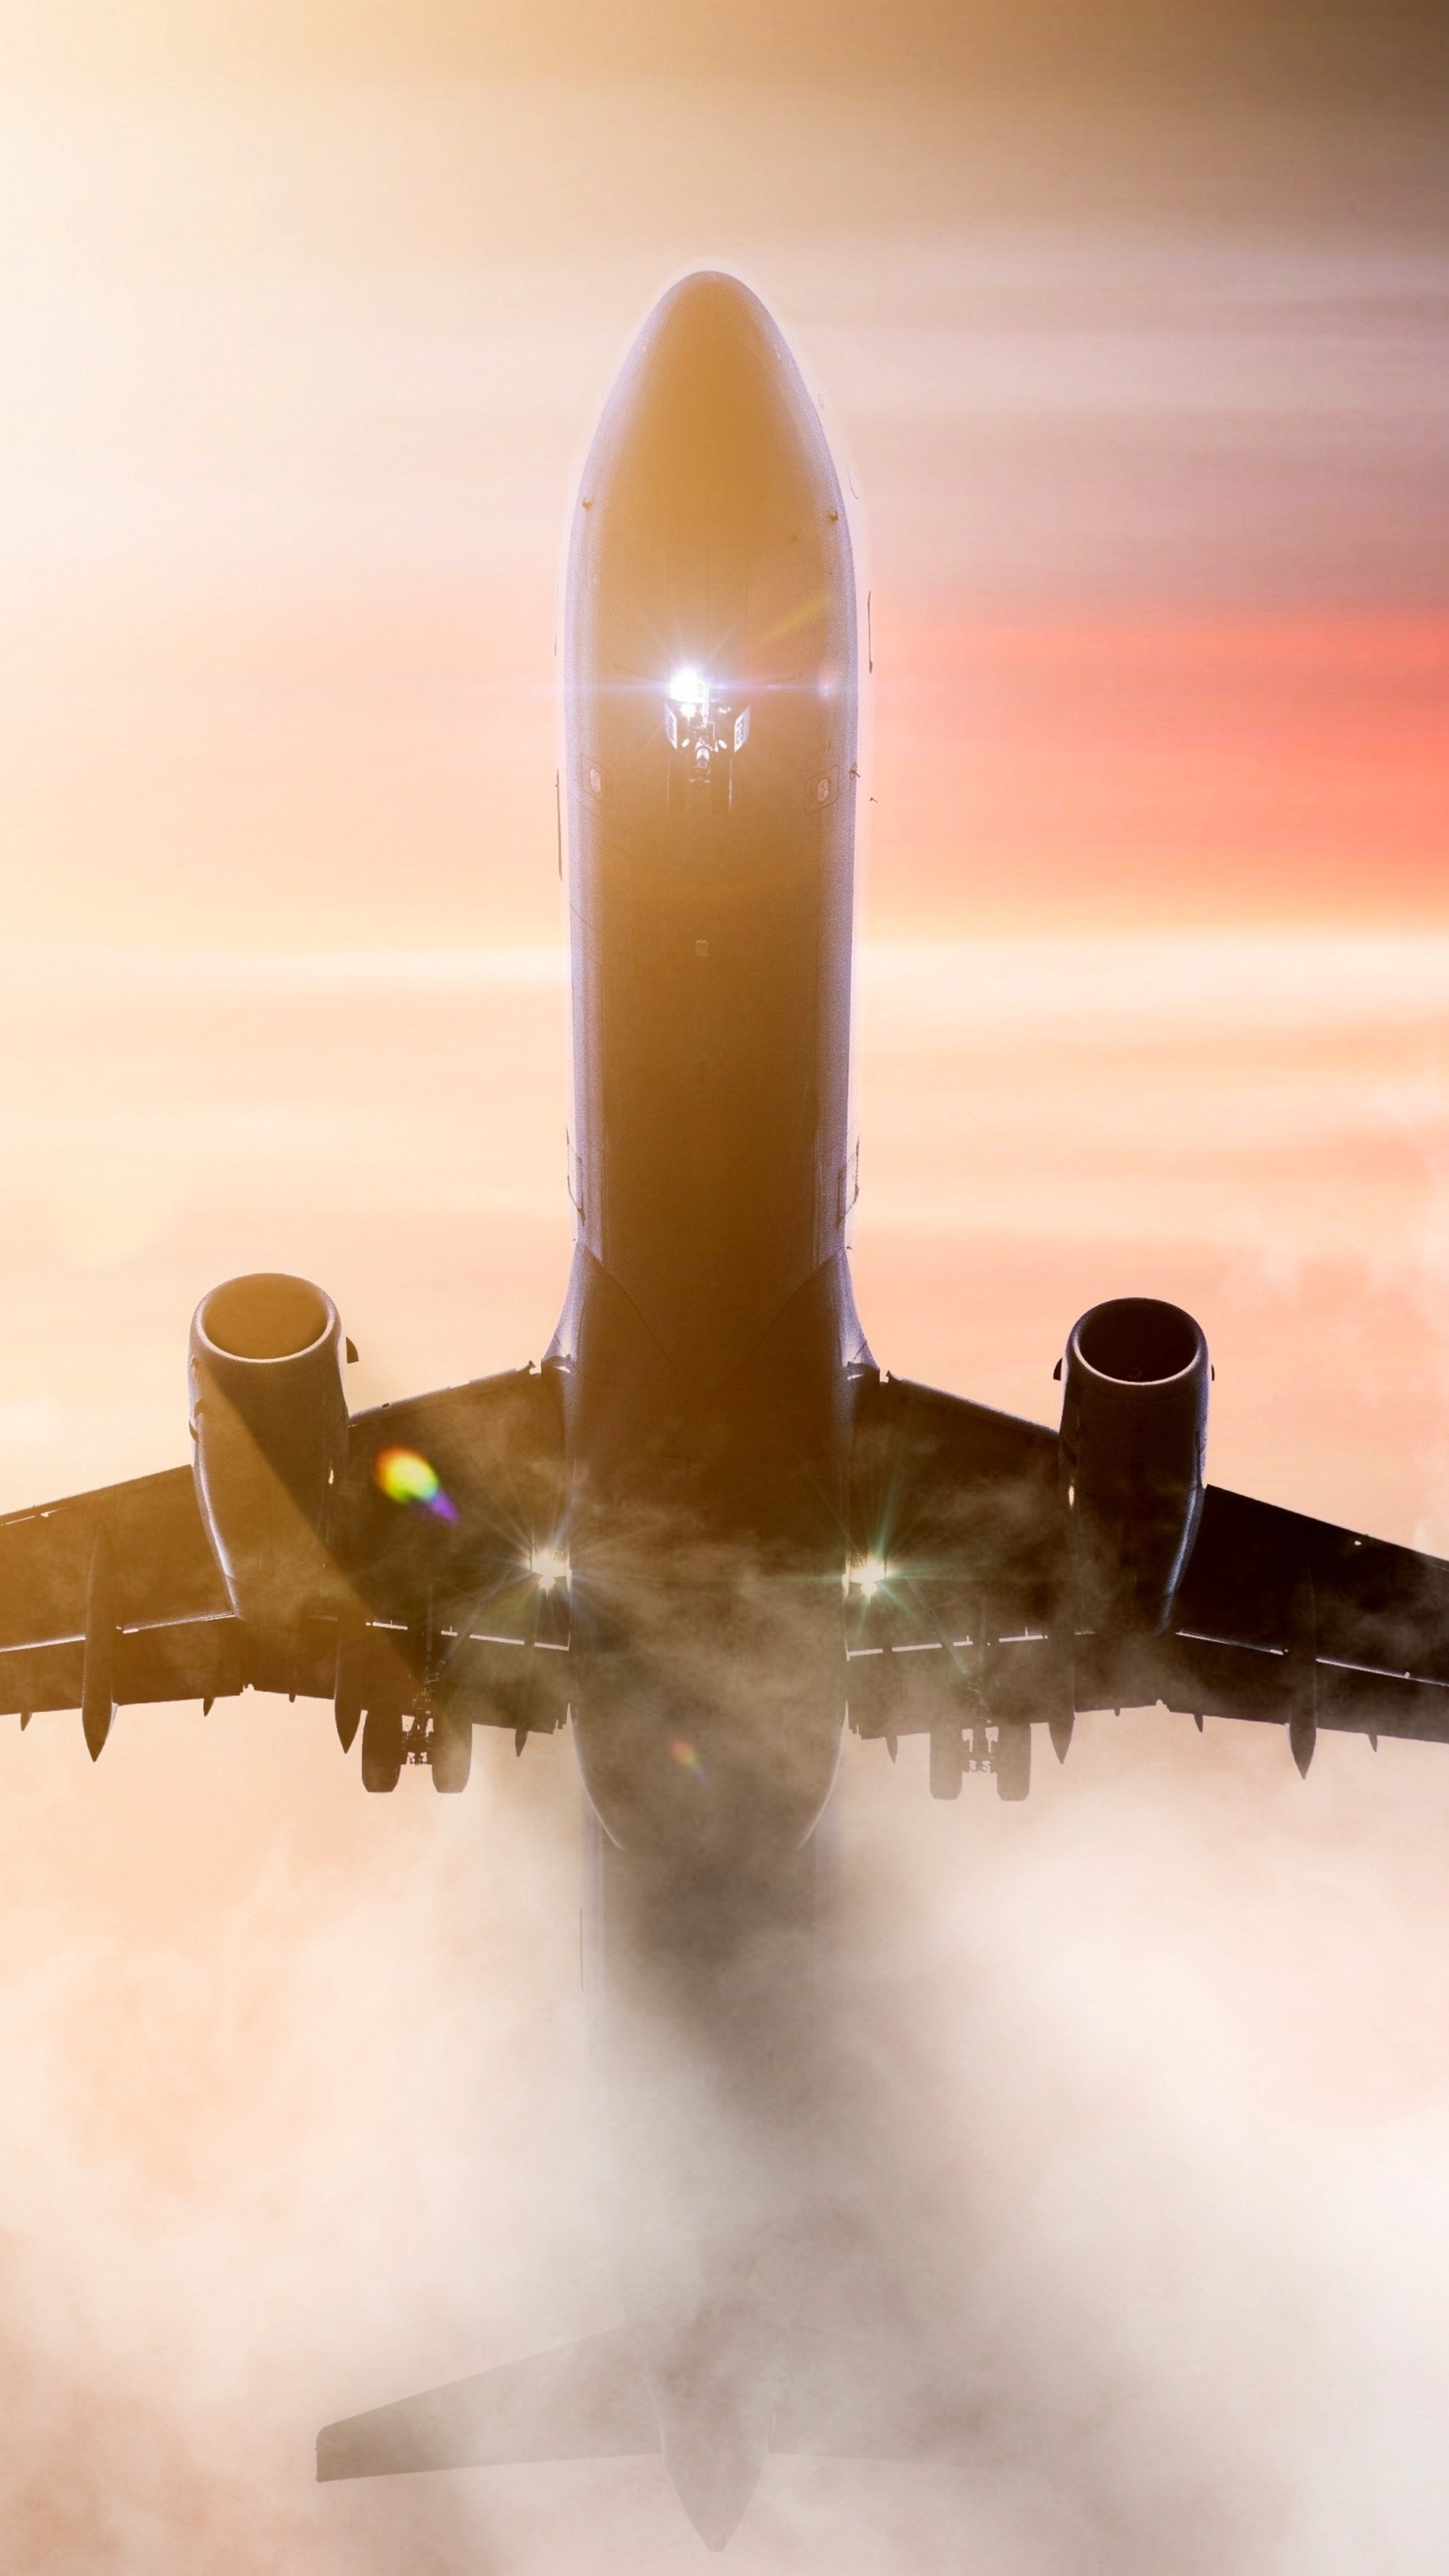 Airplane, 4K Sony Xperia, High-resolution wallpapers, Stunning visuals, 2160x3840 4K Phone